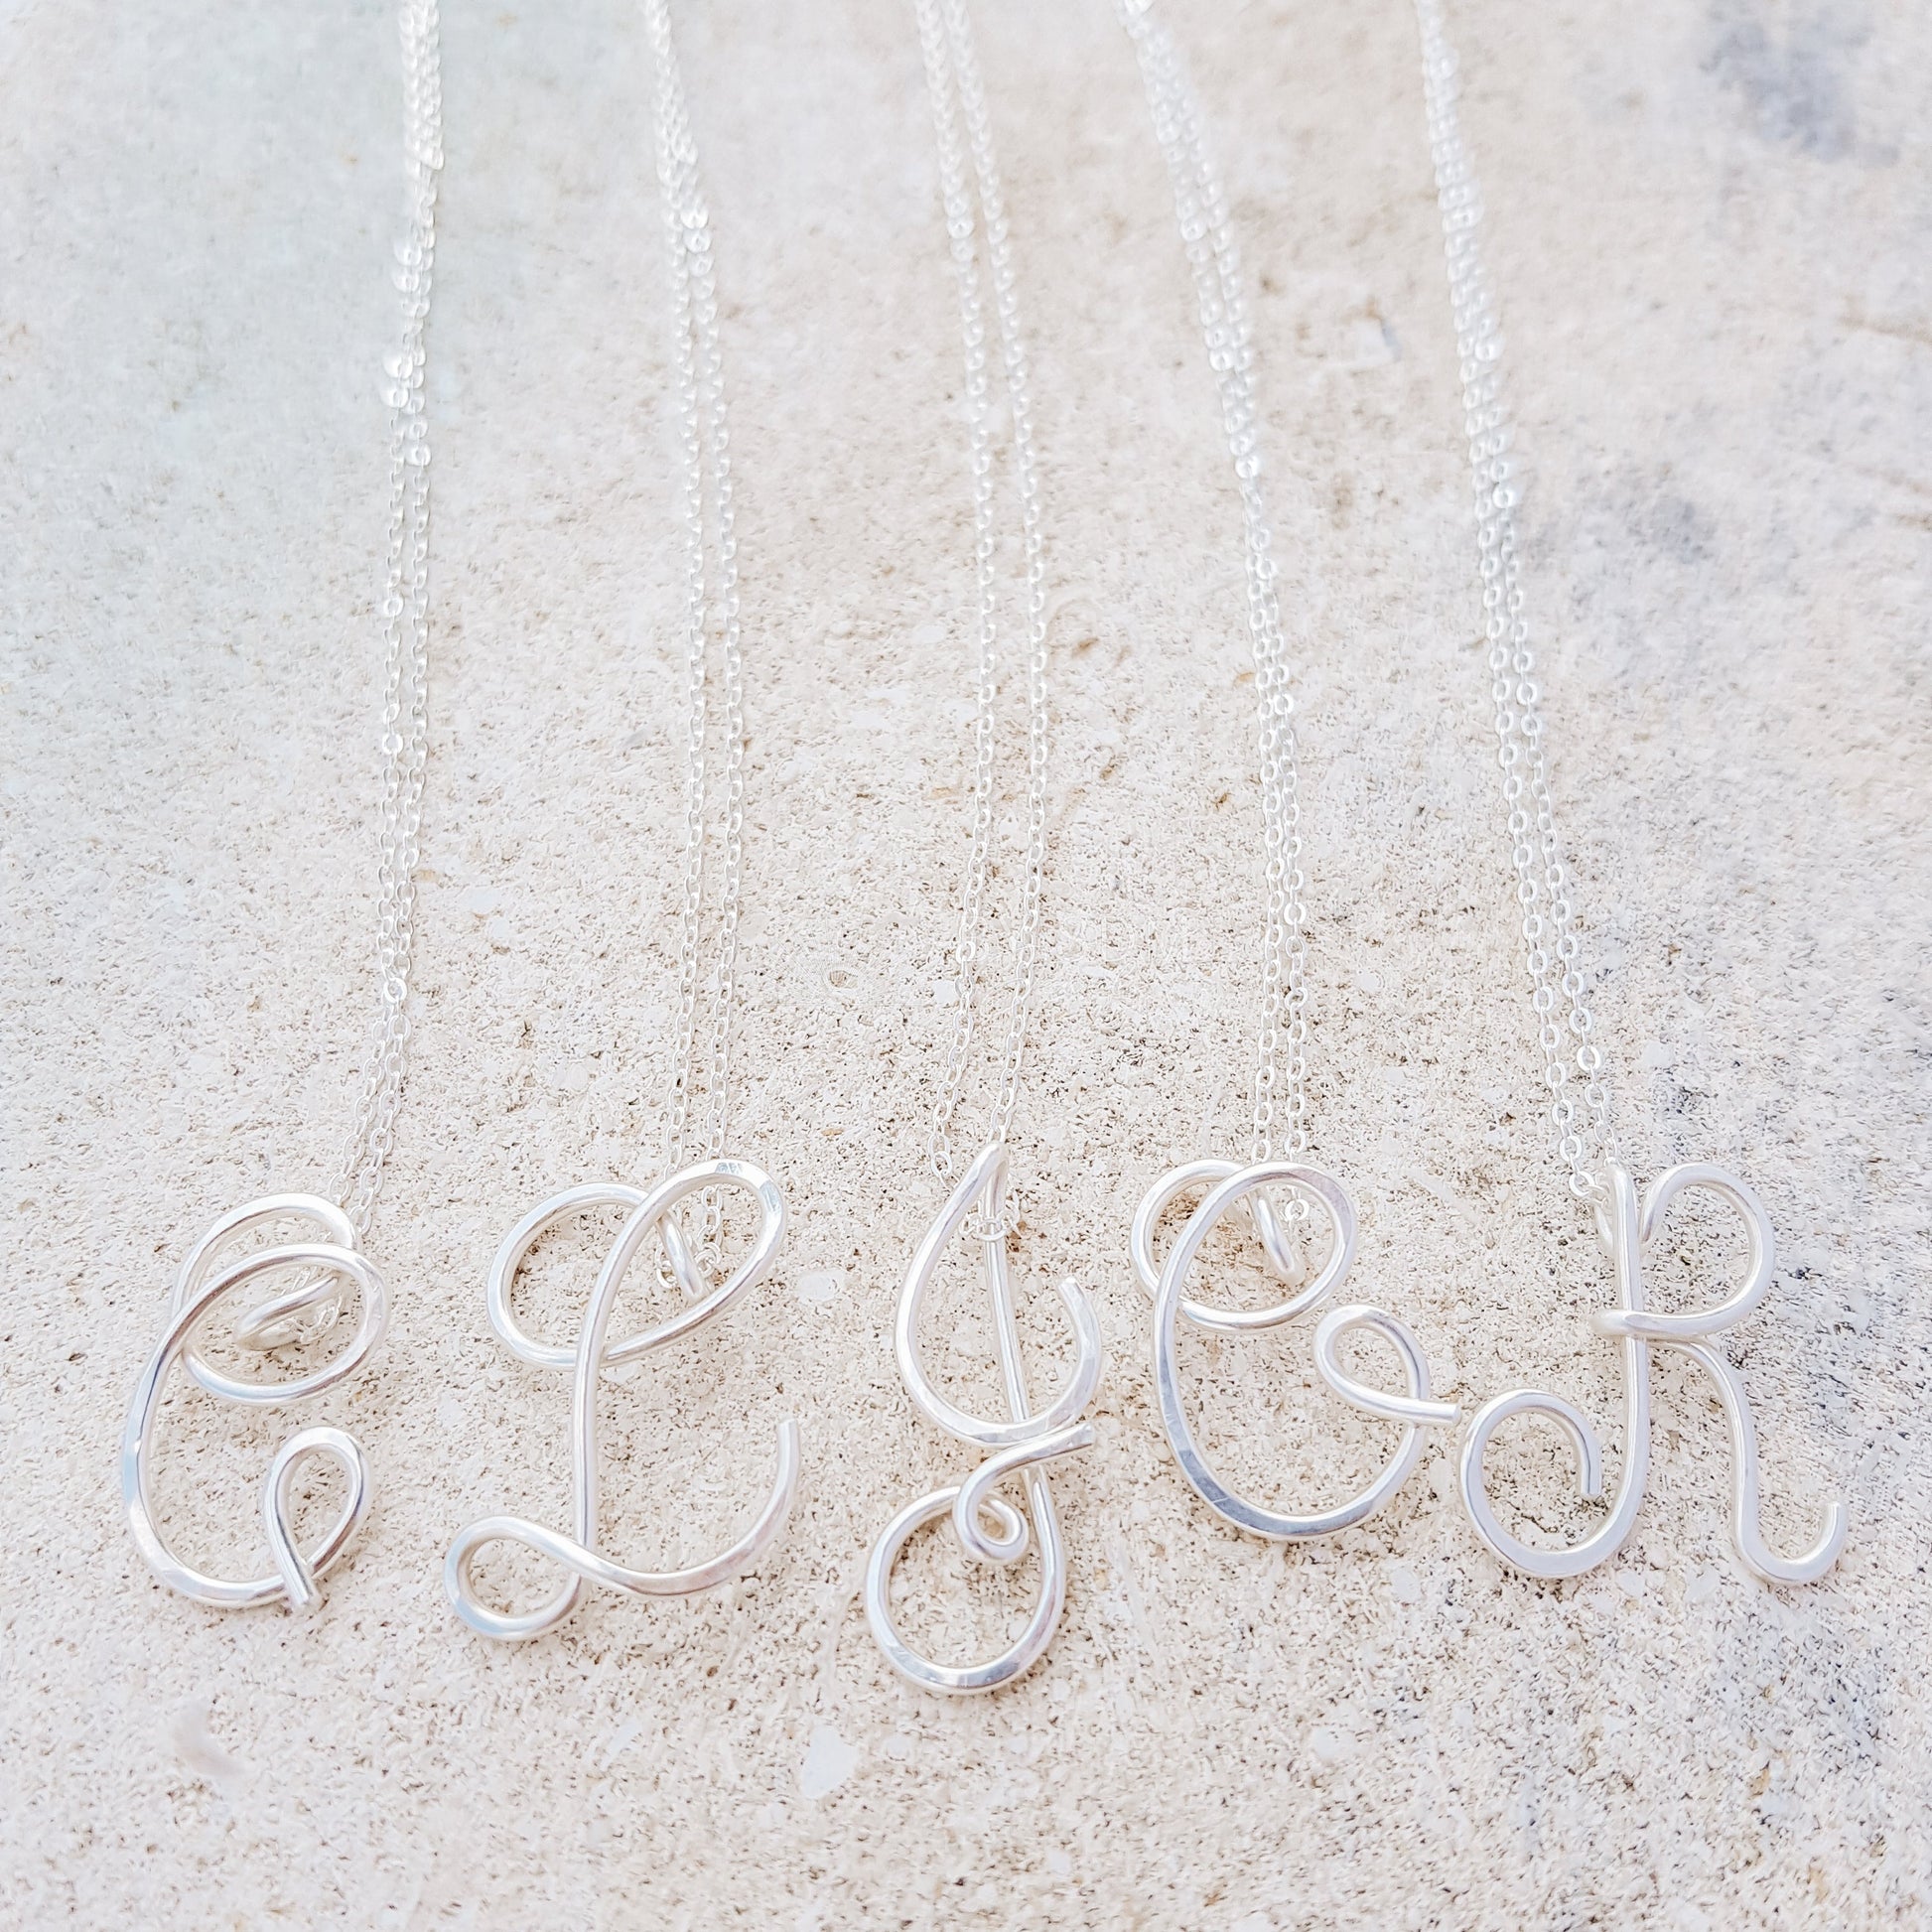 R Custom Letter Necklace • Personalized Name Necklace • R Custom Initials Necklace • Personalized Gift • Mother's Day Gift